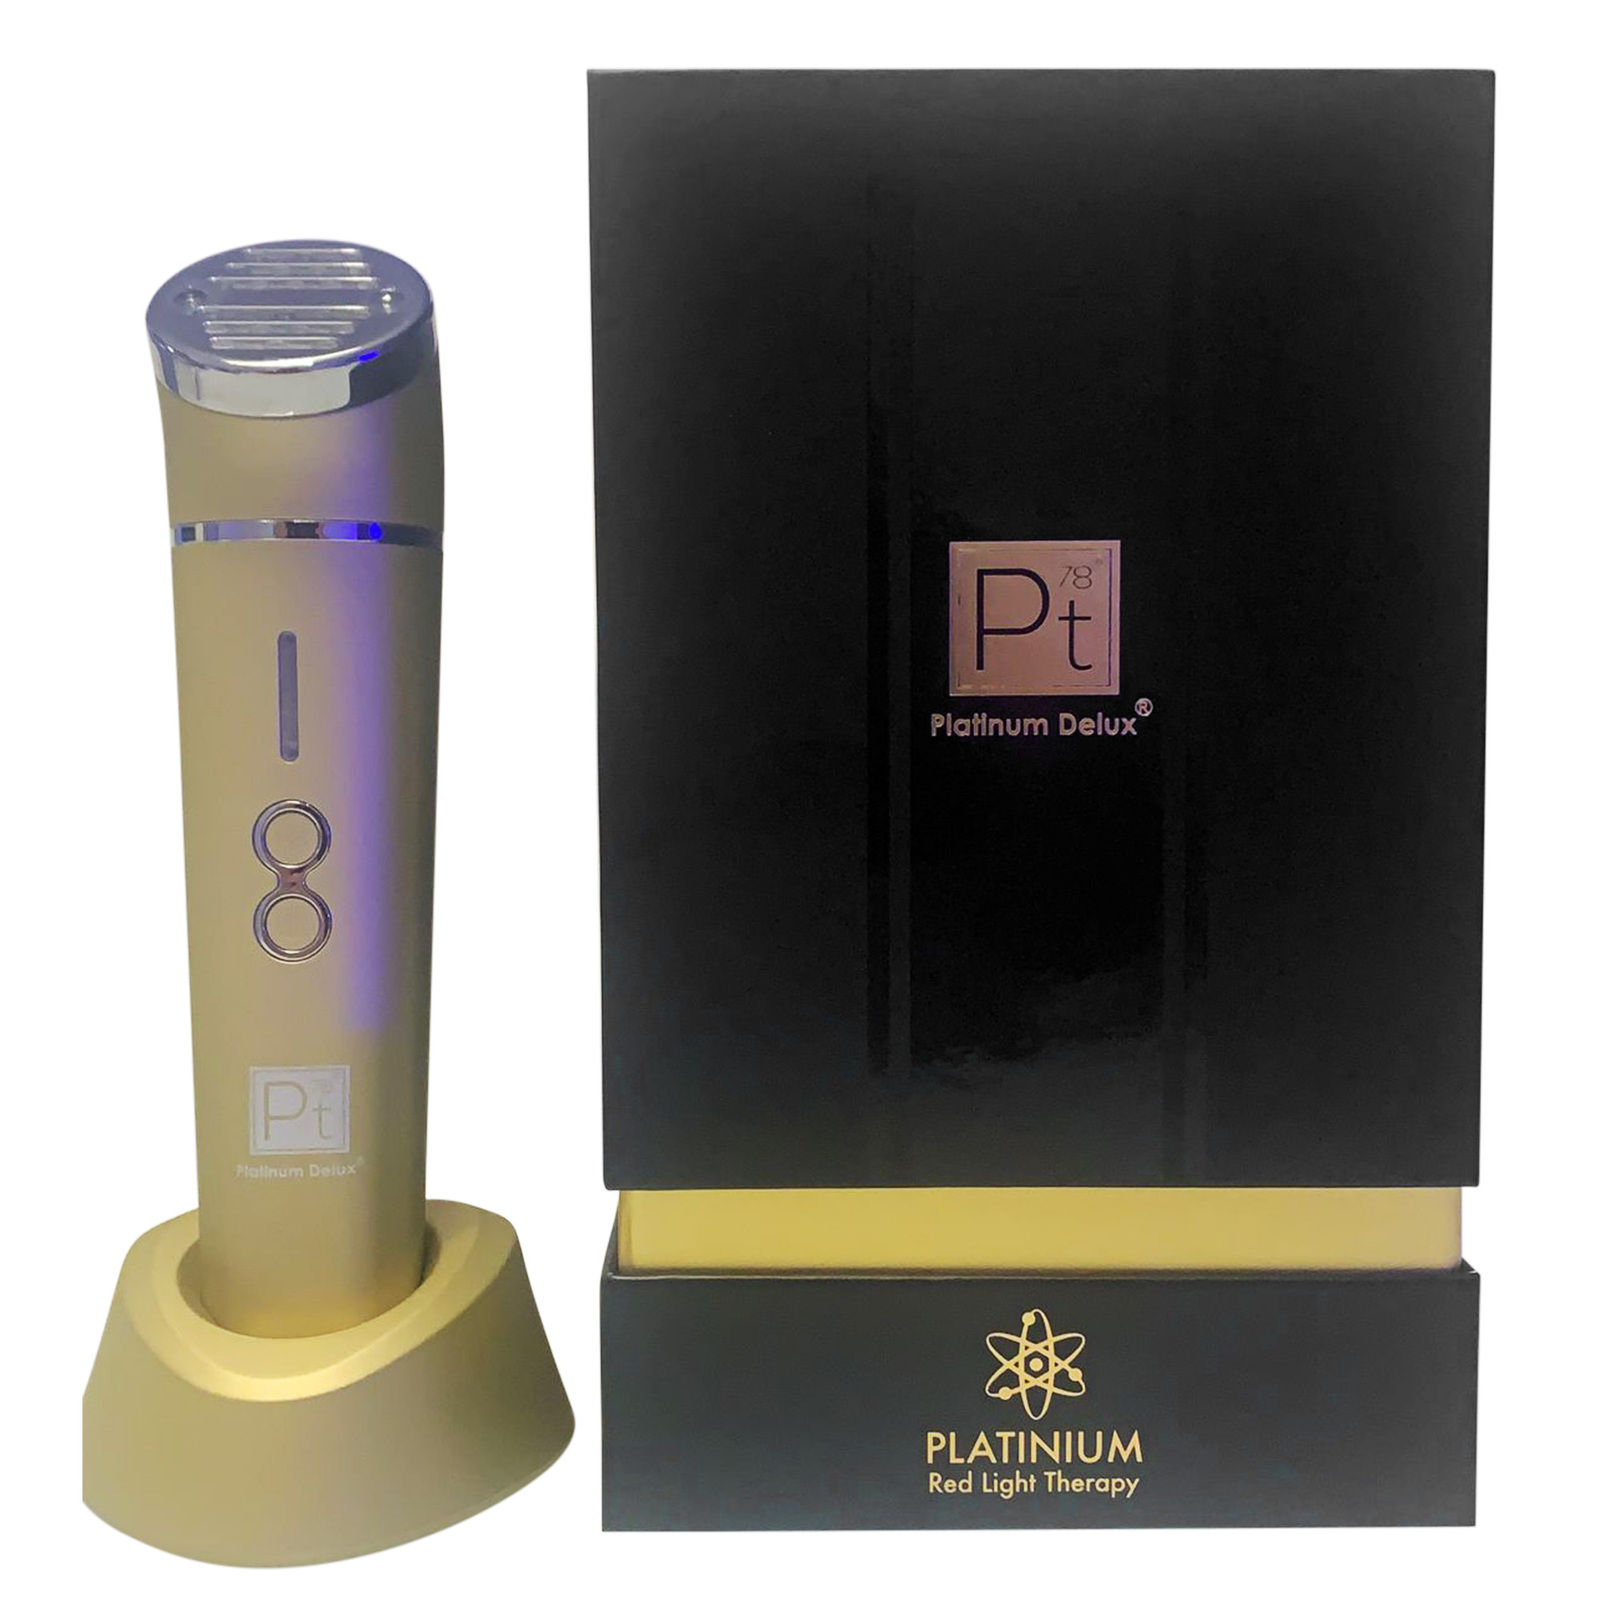 Platinum Gold Red Light Therapy - $1,499.00